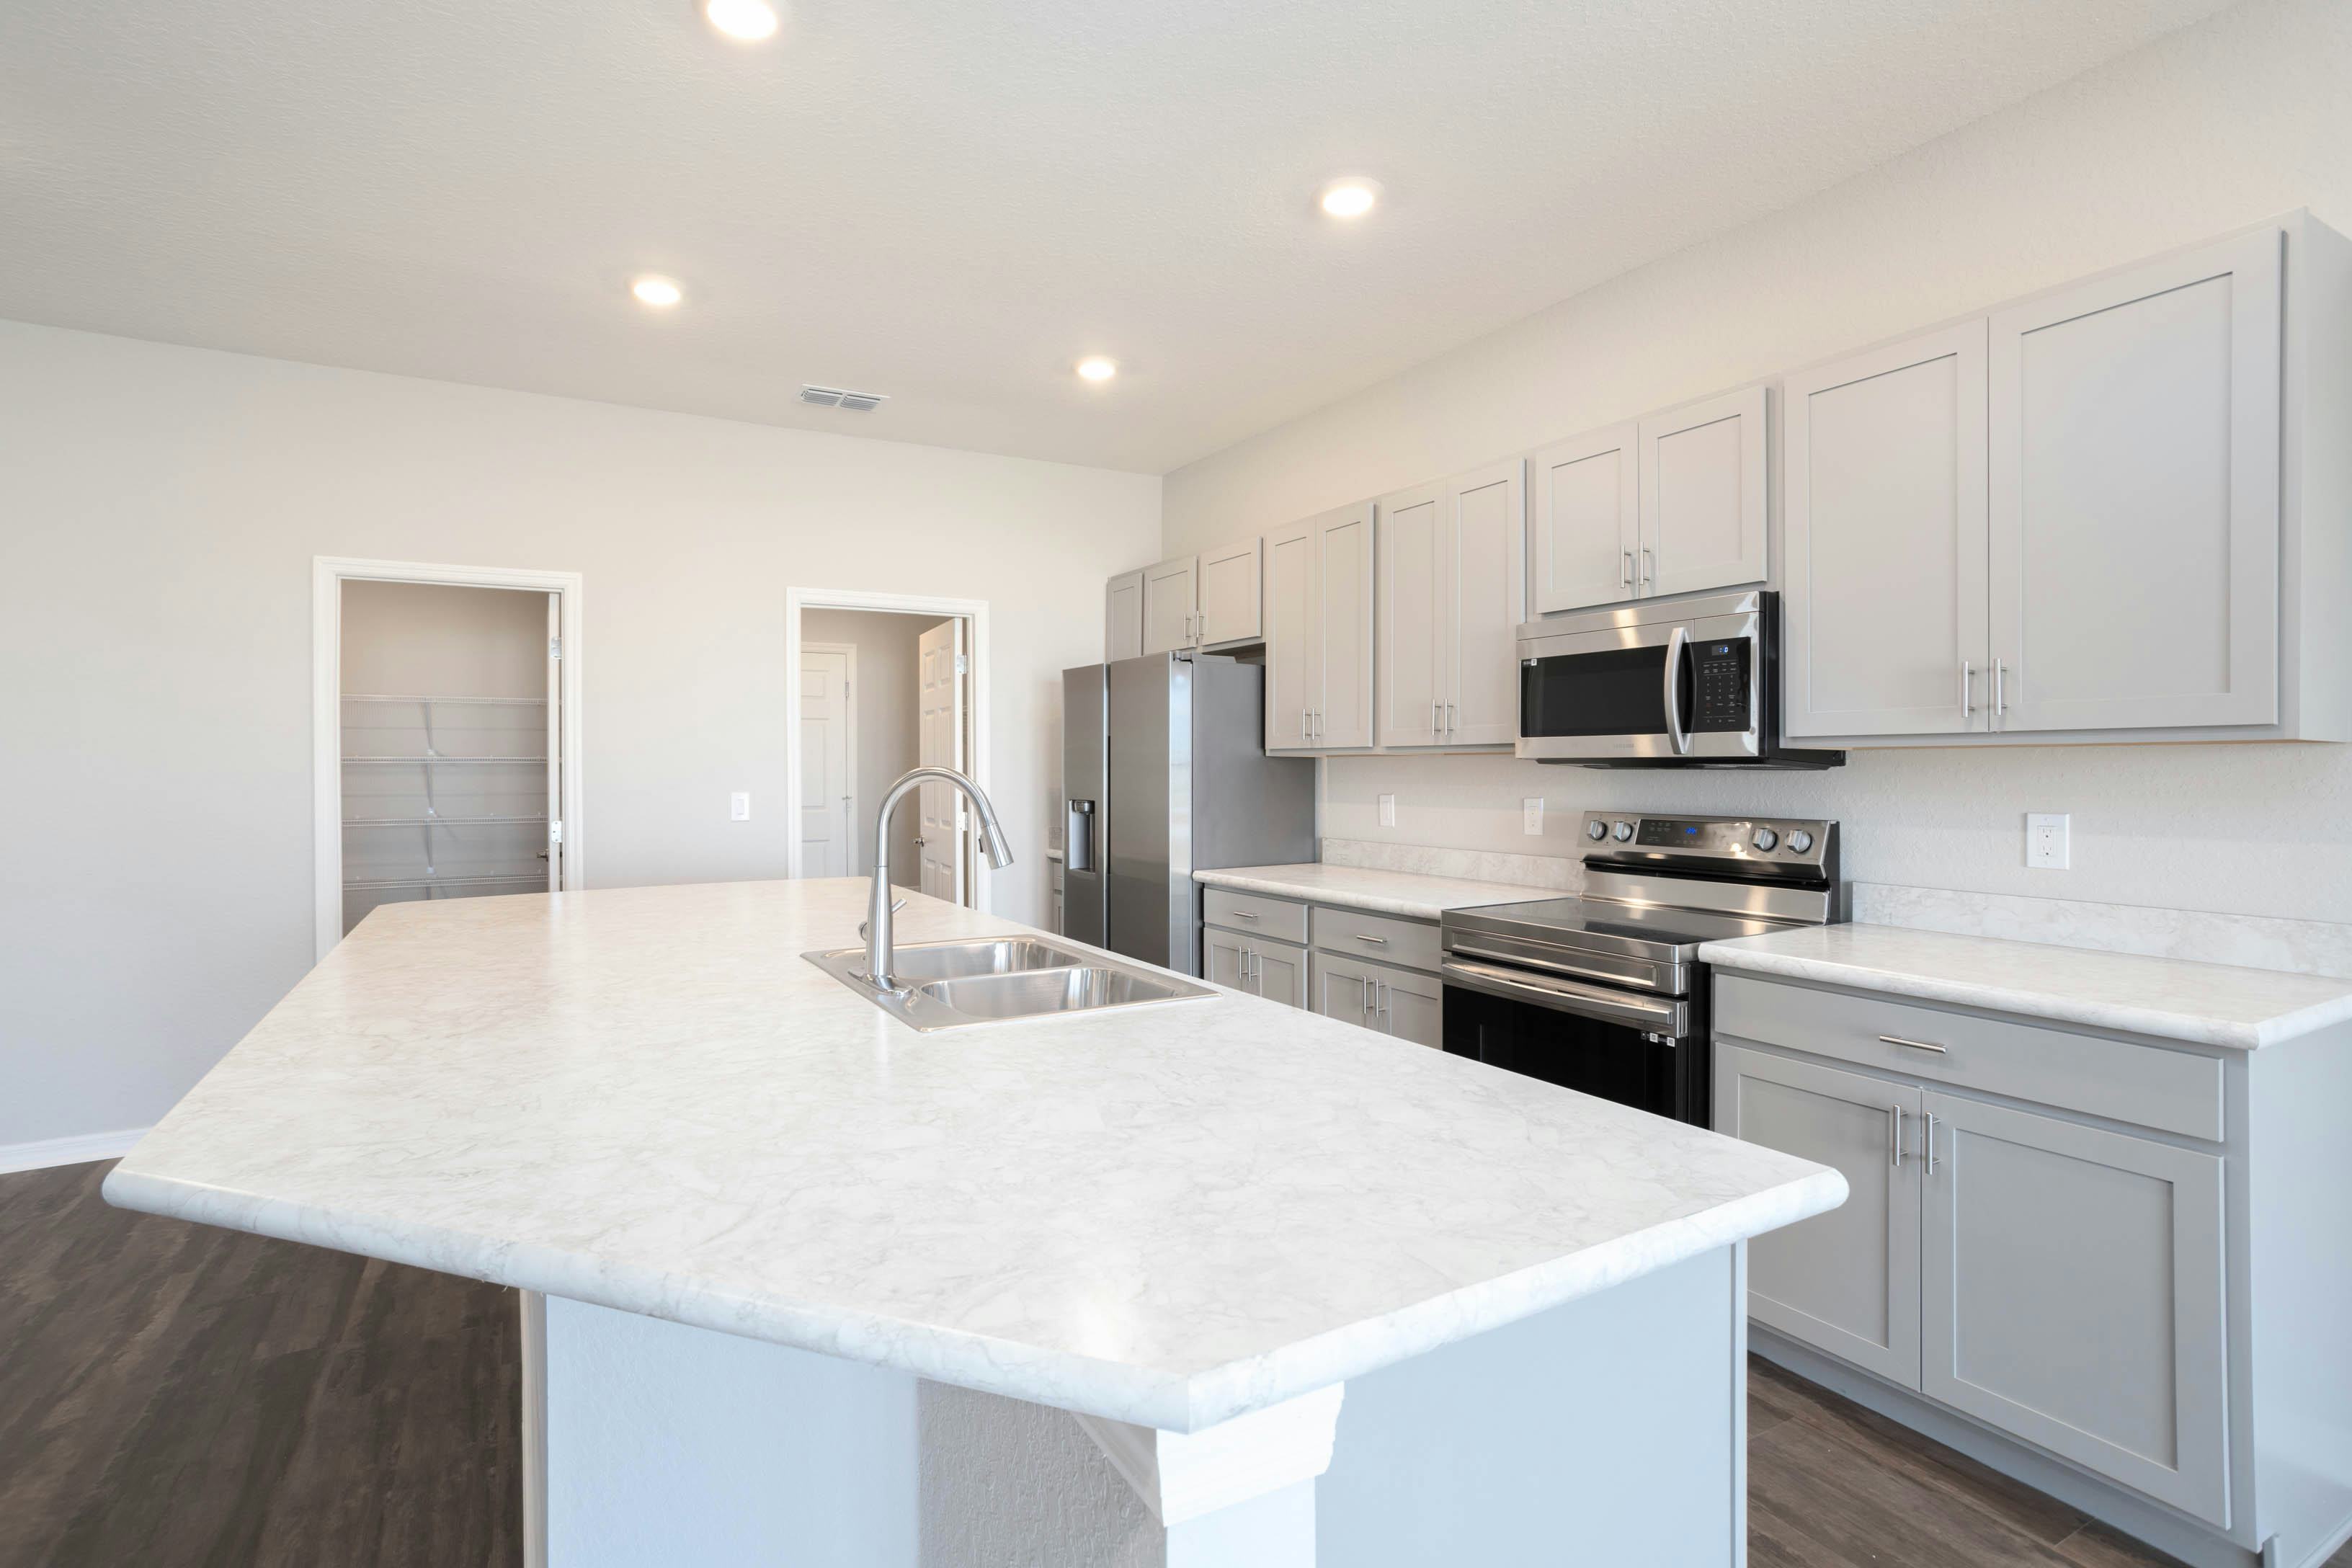 Appliances are installed prior to you moving into your new construction home